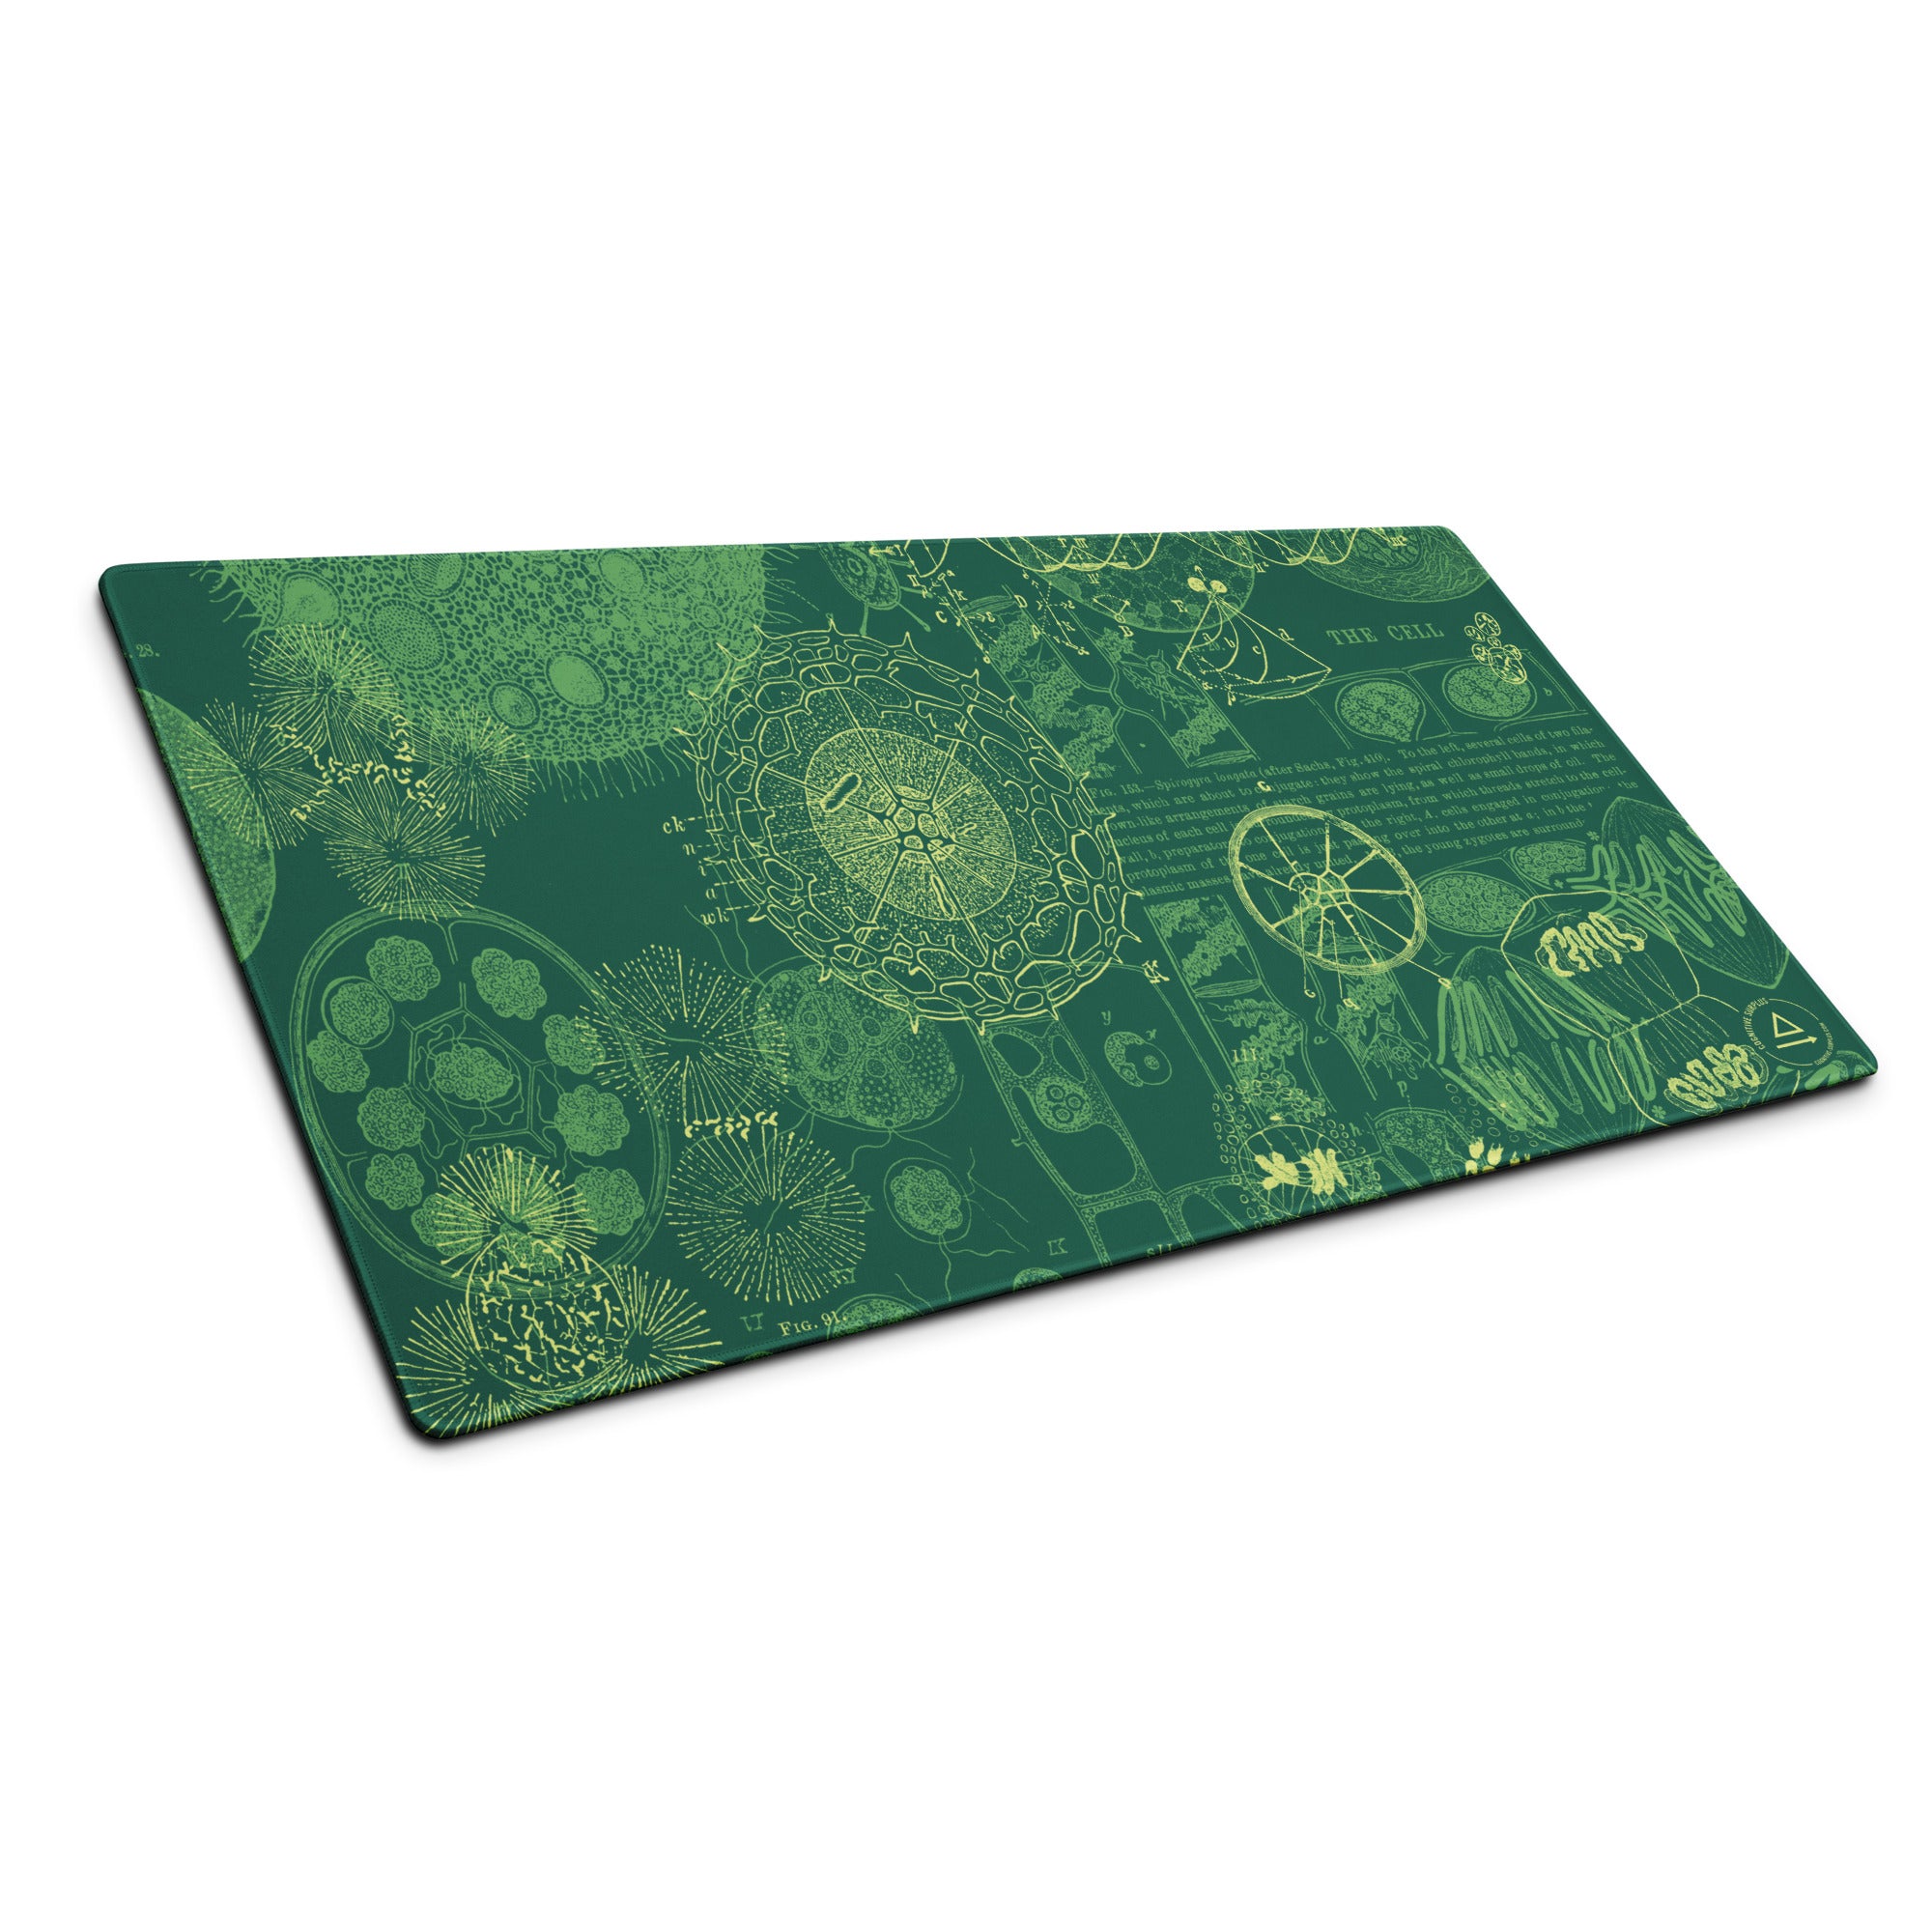 gaming-mouse-pad-white-36x18-front-6595e83aa958e.jpg